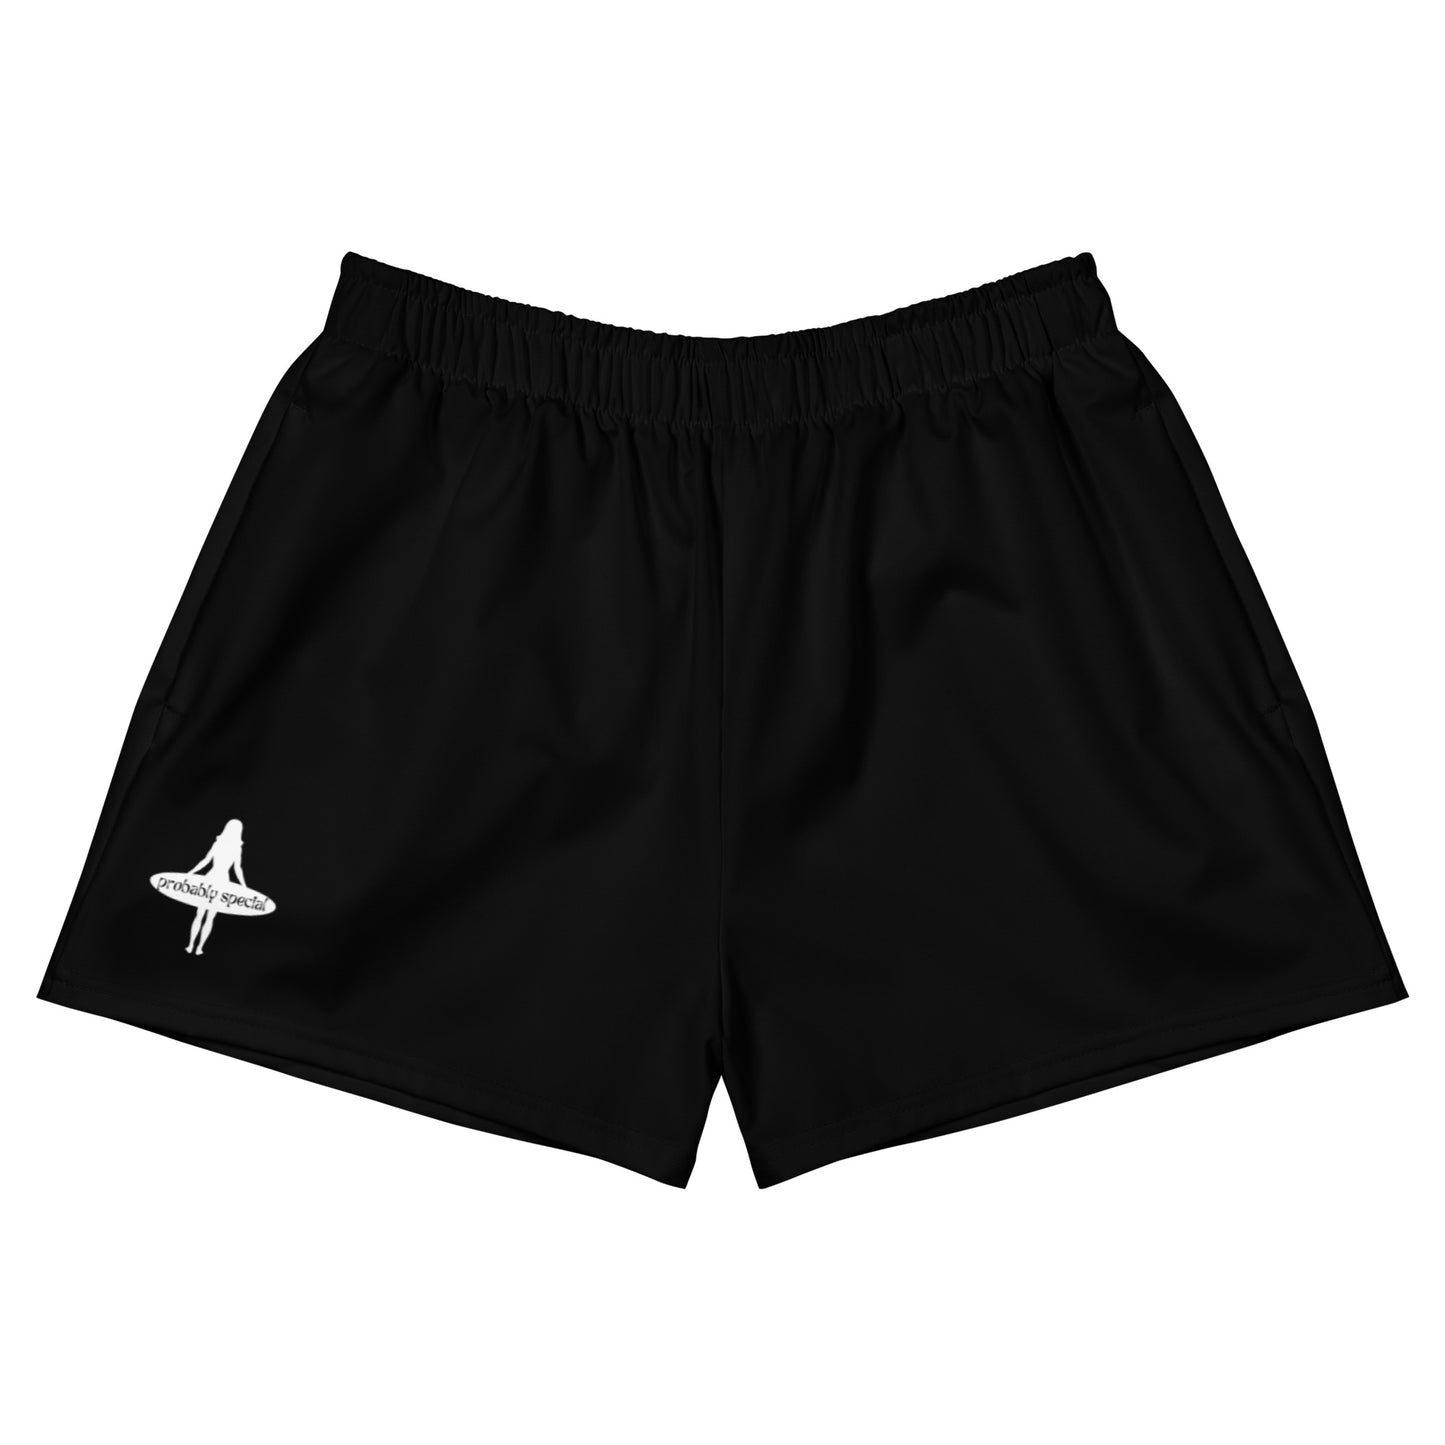 Classic Black Recycled Board Short with UPF 50+ Protection